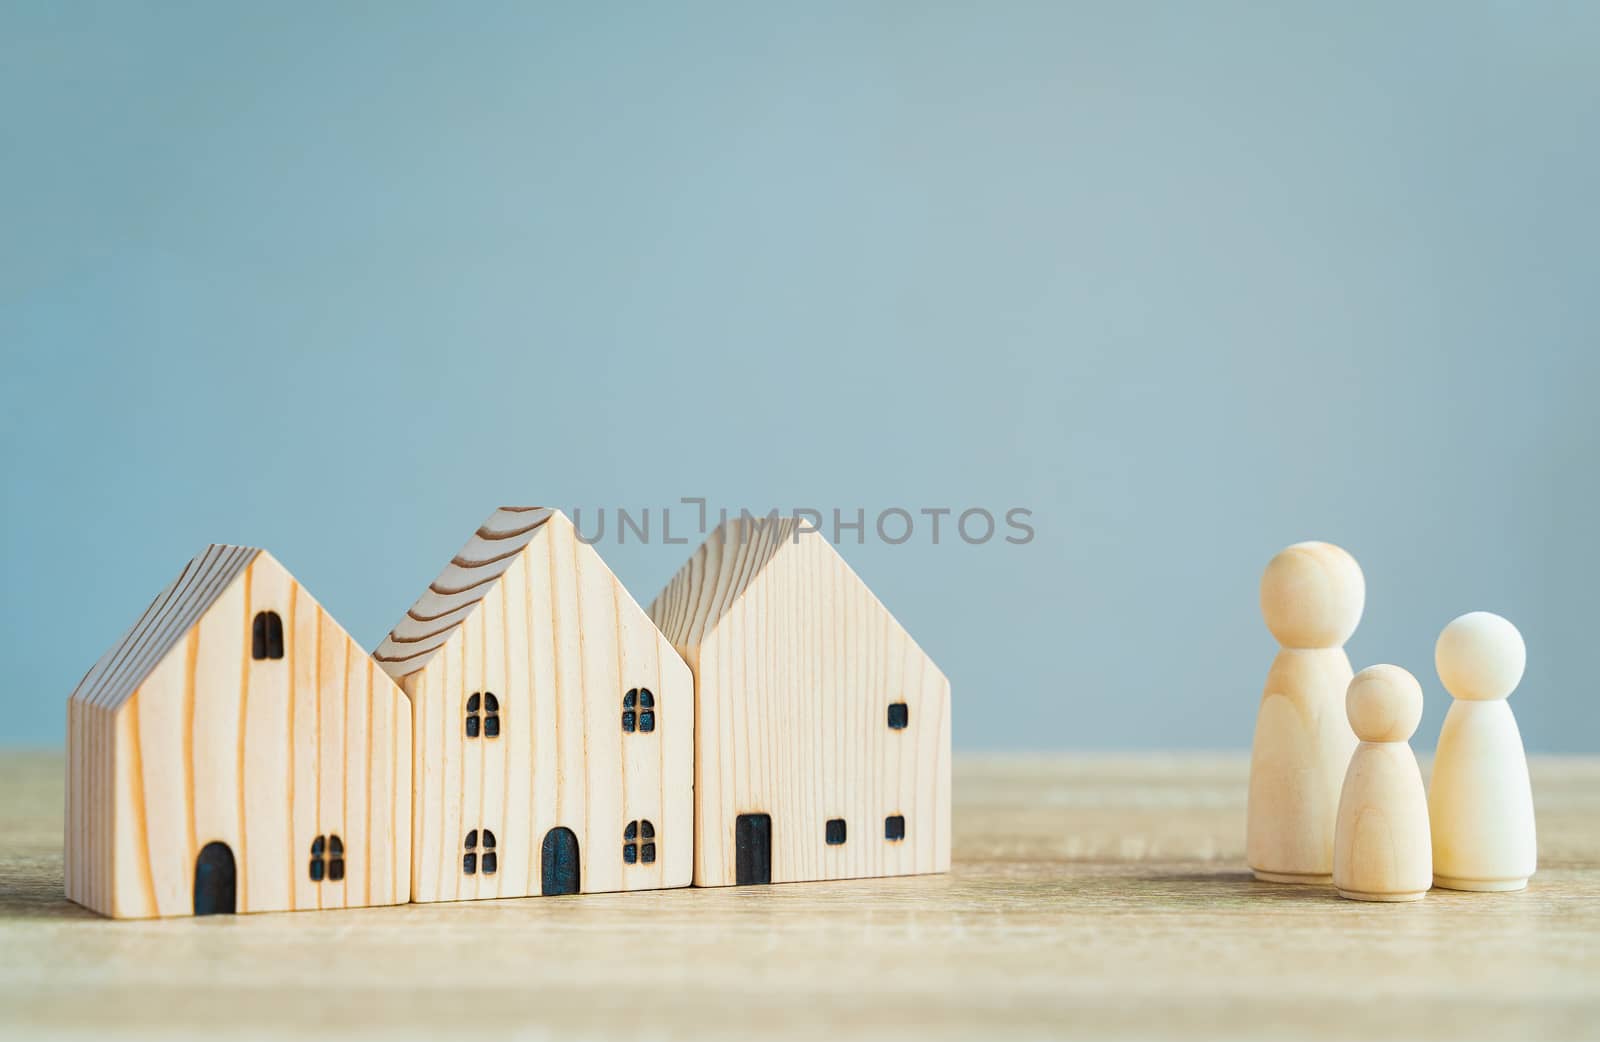 Money savings concepts. Wooden house models with family wooden d by Boophuket